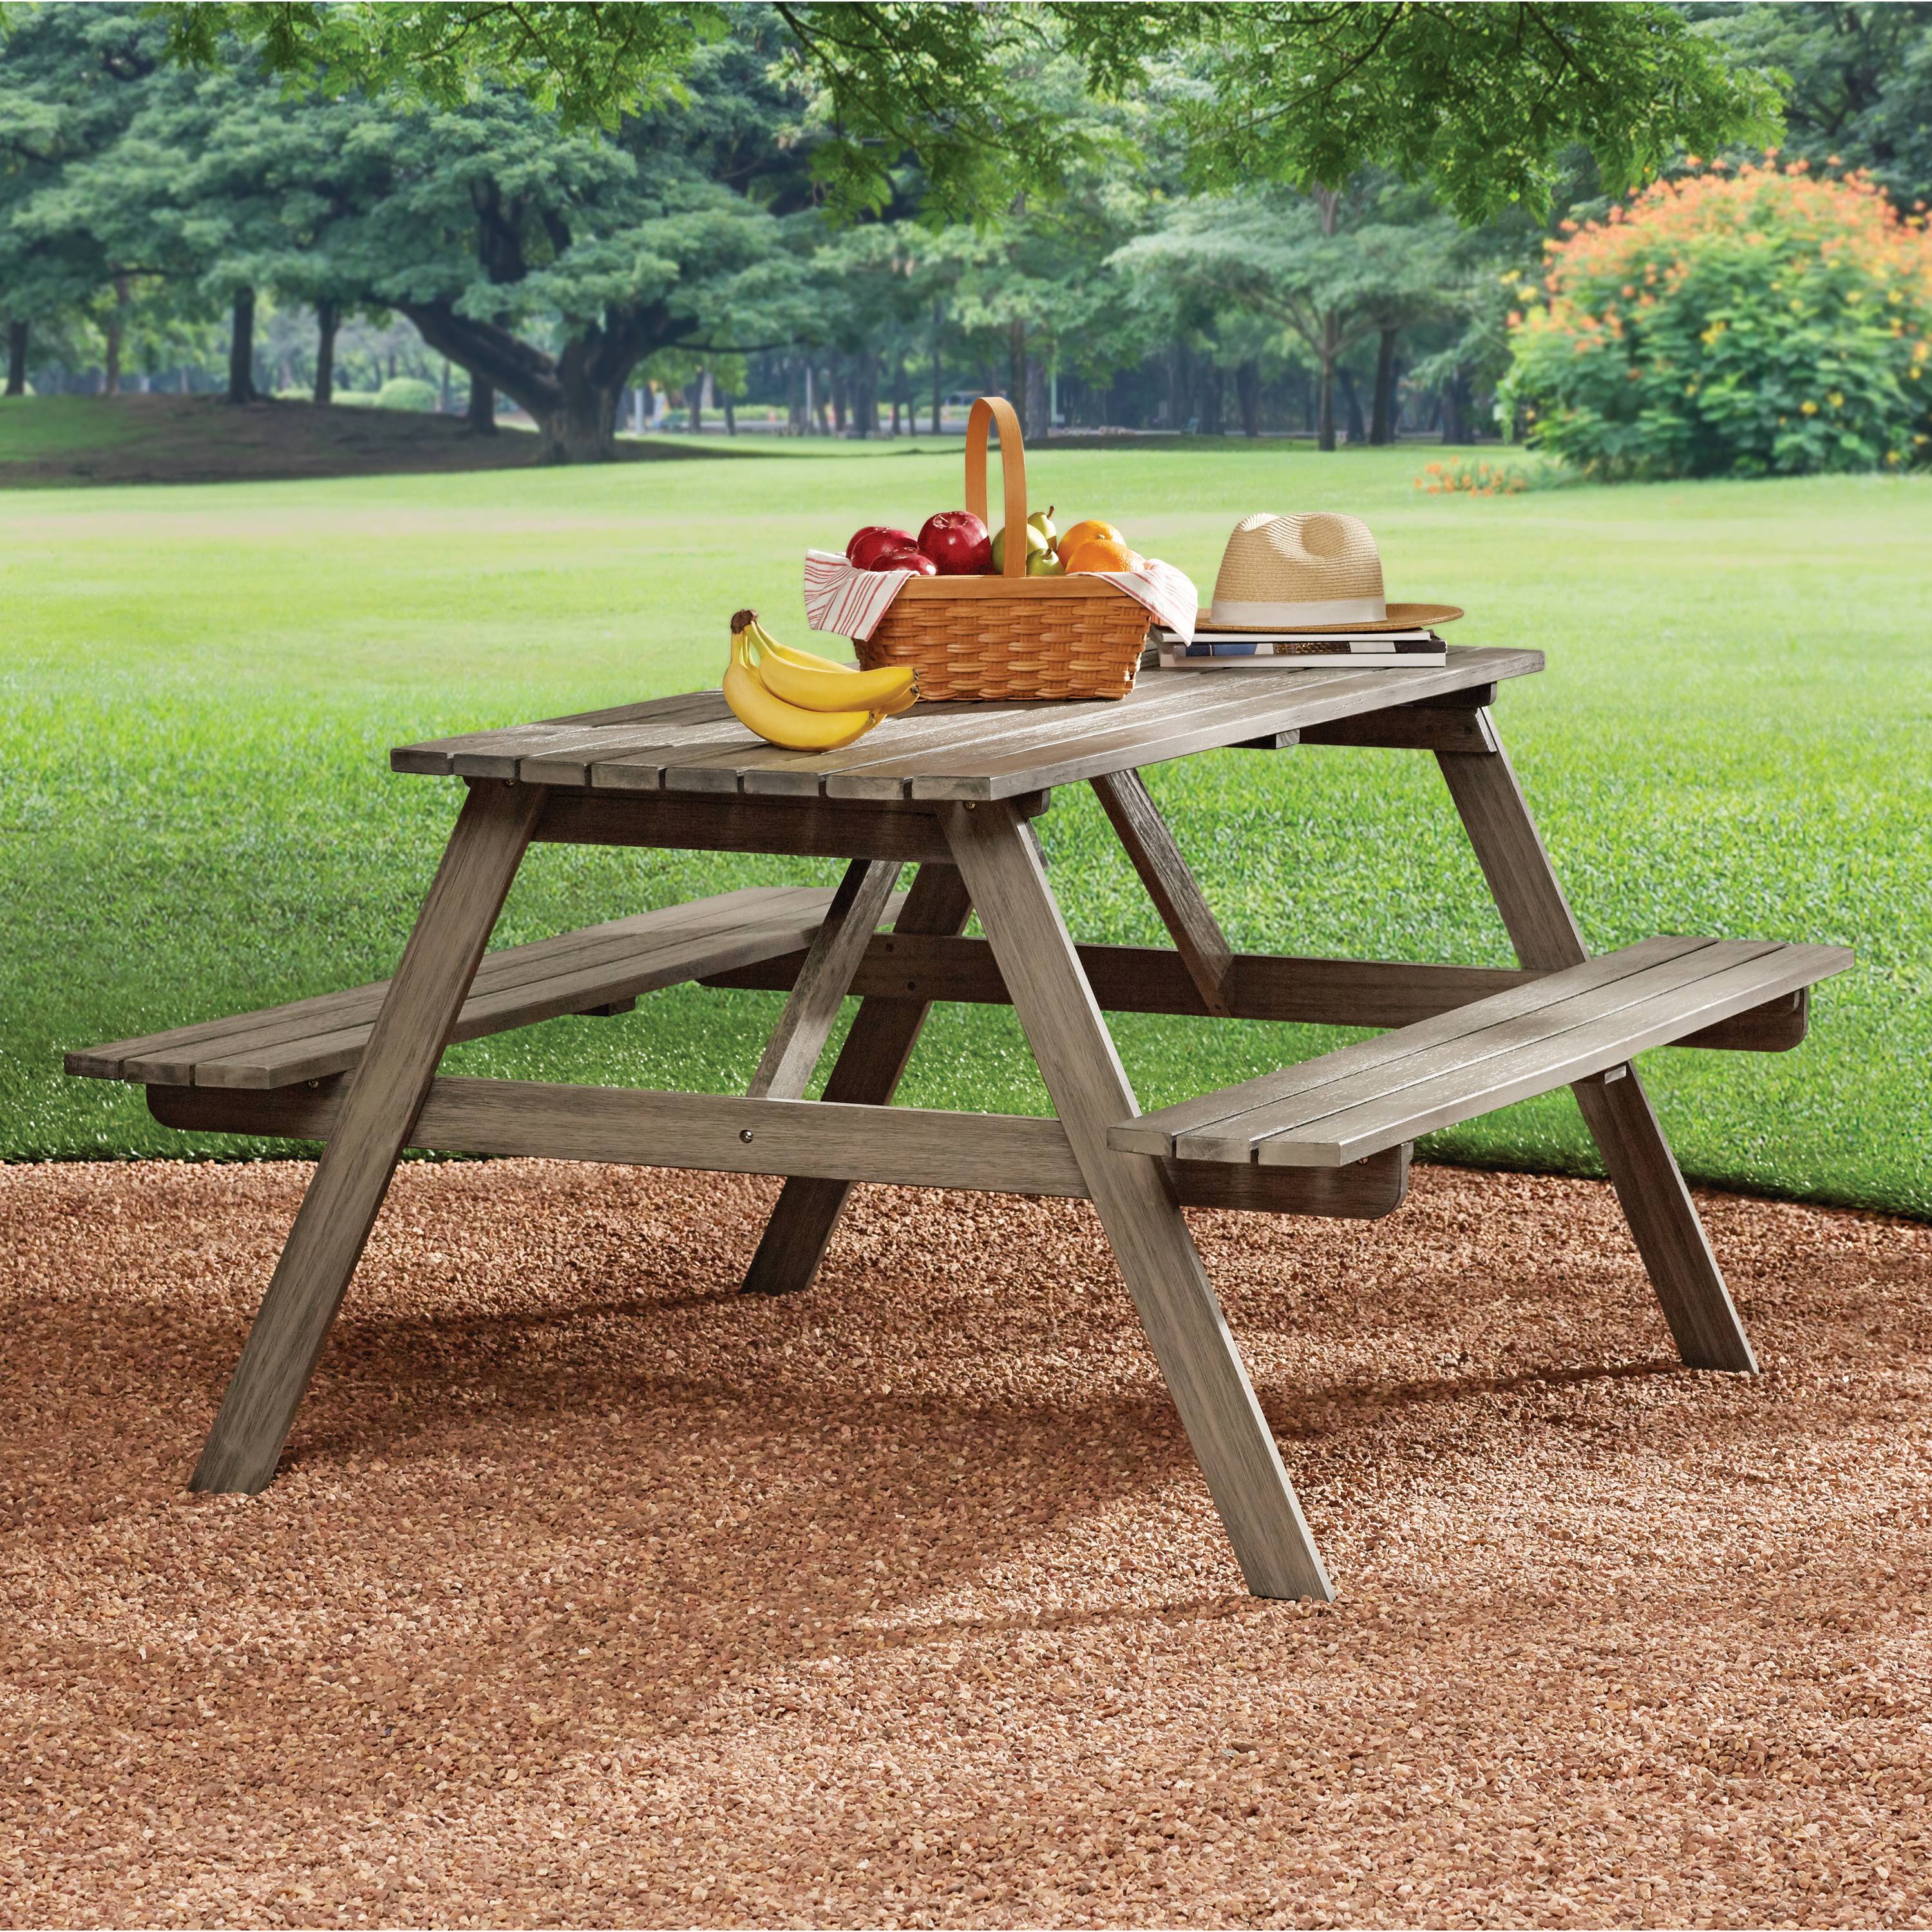 Mainstays Martis Bay Wood Outdoor Picnic Table, Gray - image 1 of 6